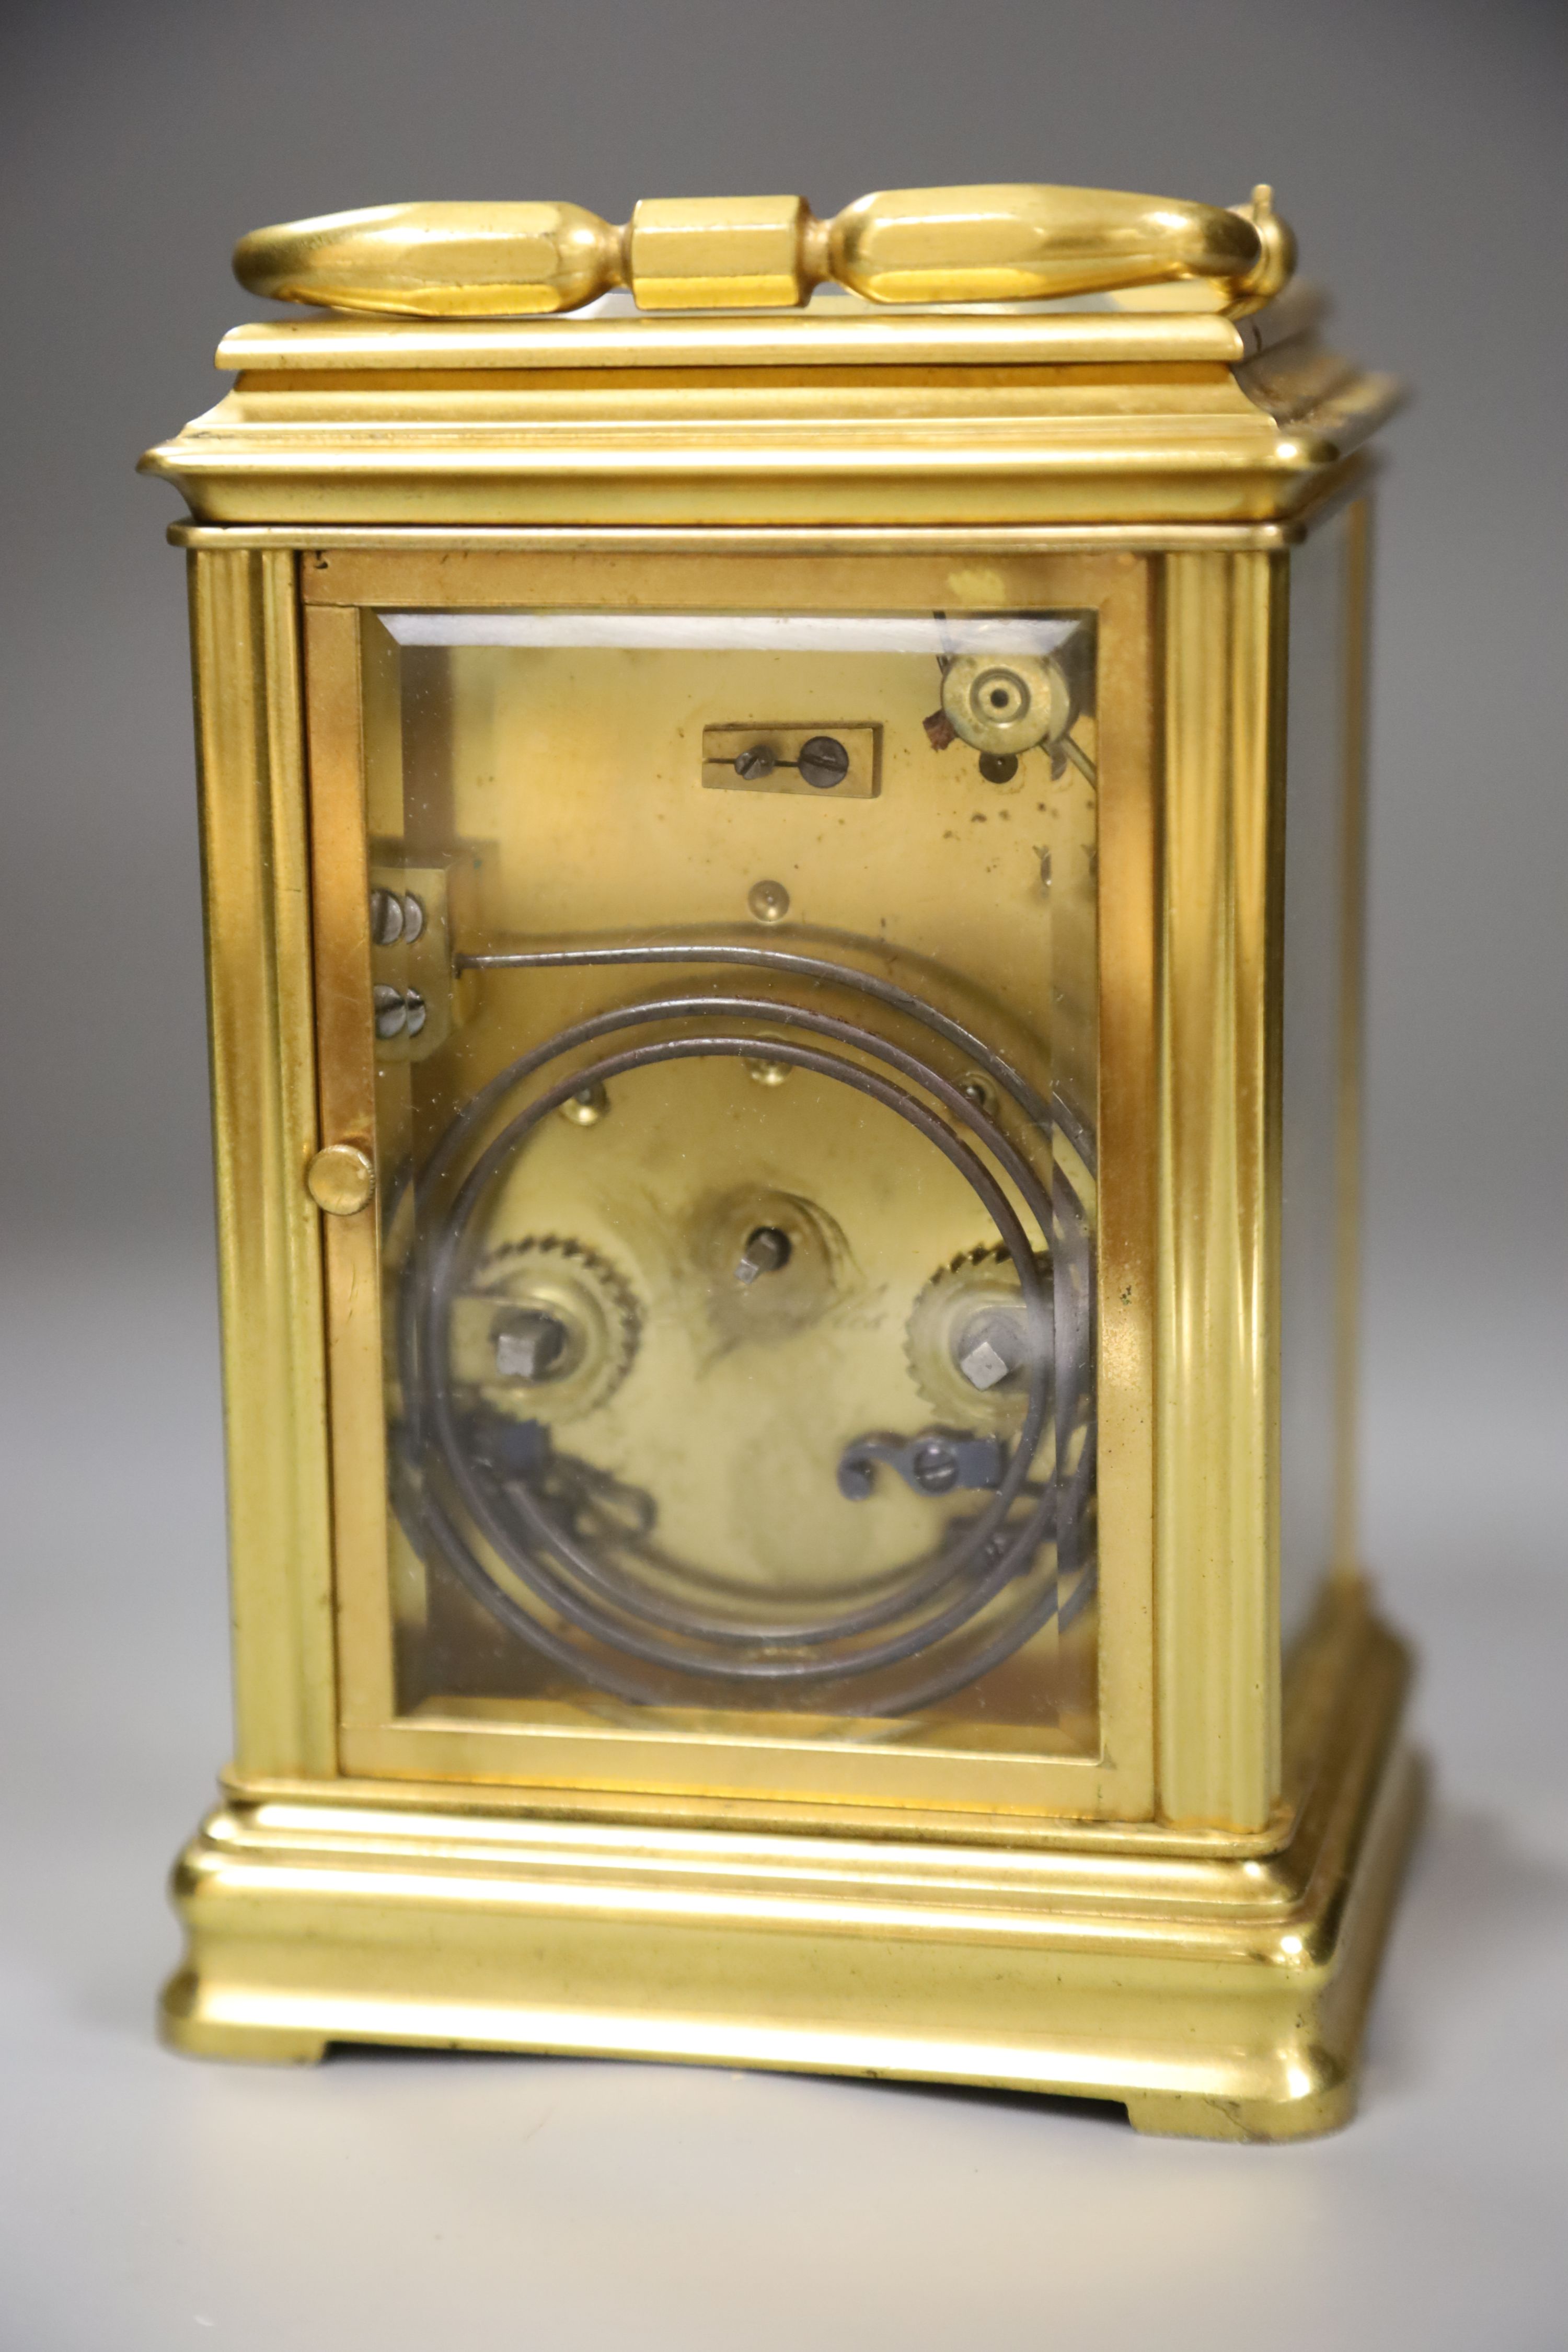 A large late 19th century French brass carriage clock, height 15cm